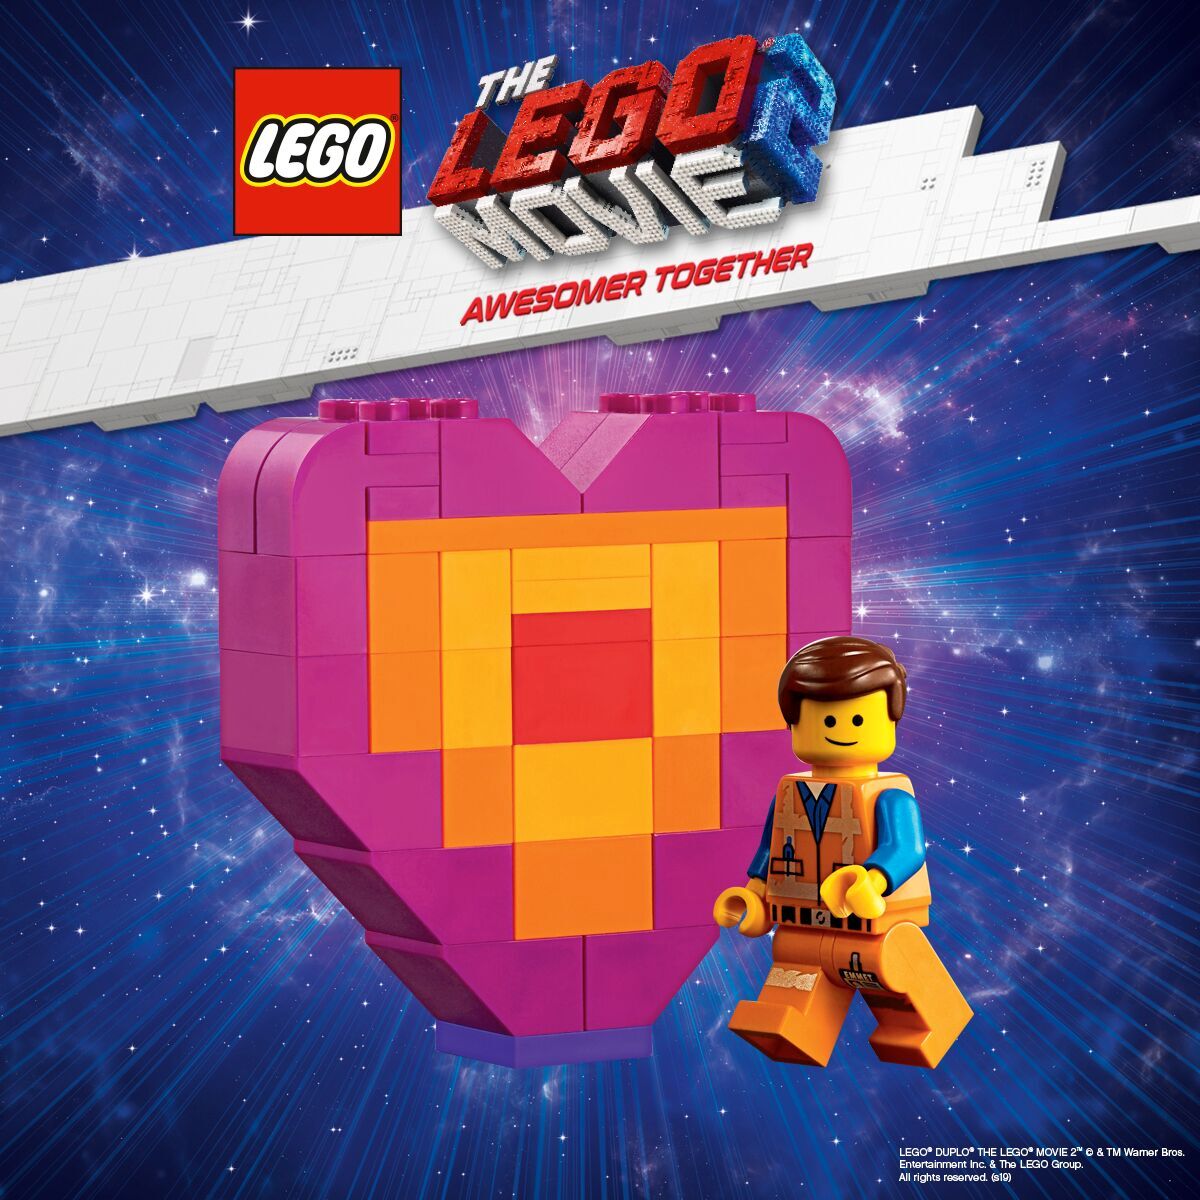 Make Your Own Movies At The LEGO Movie 2 Event @ VivoCity 